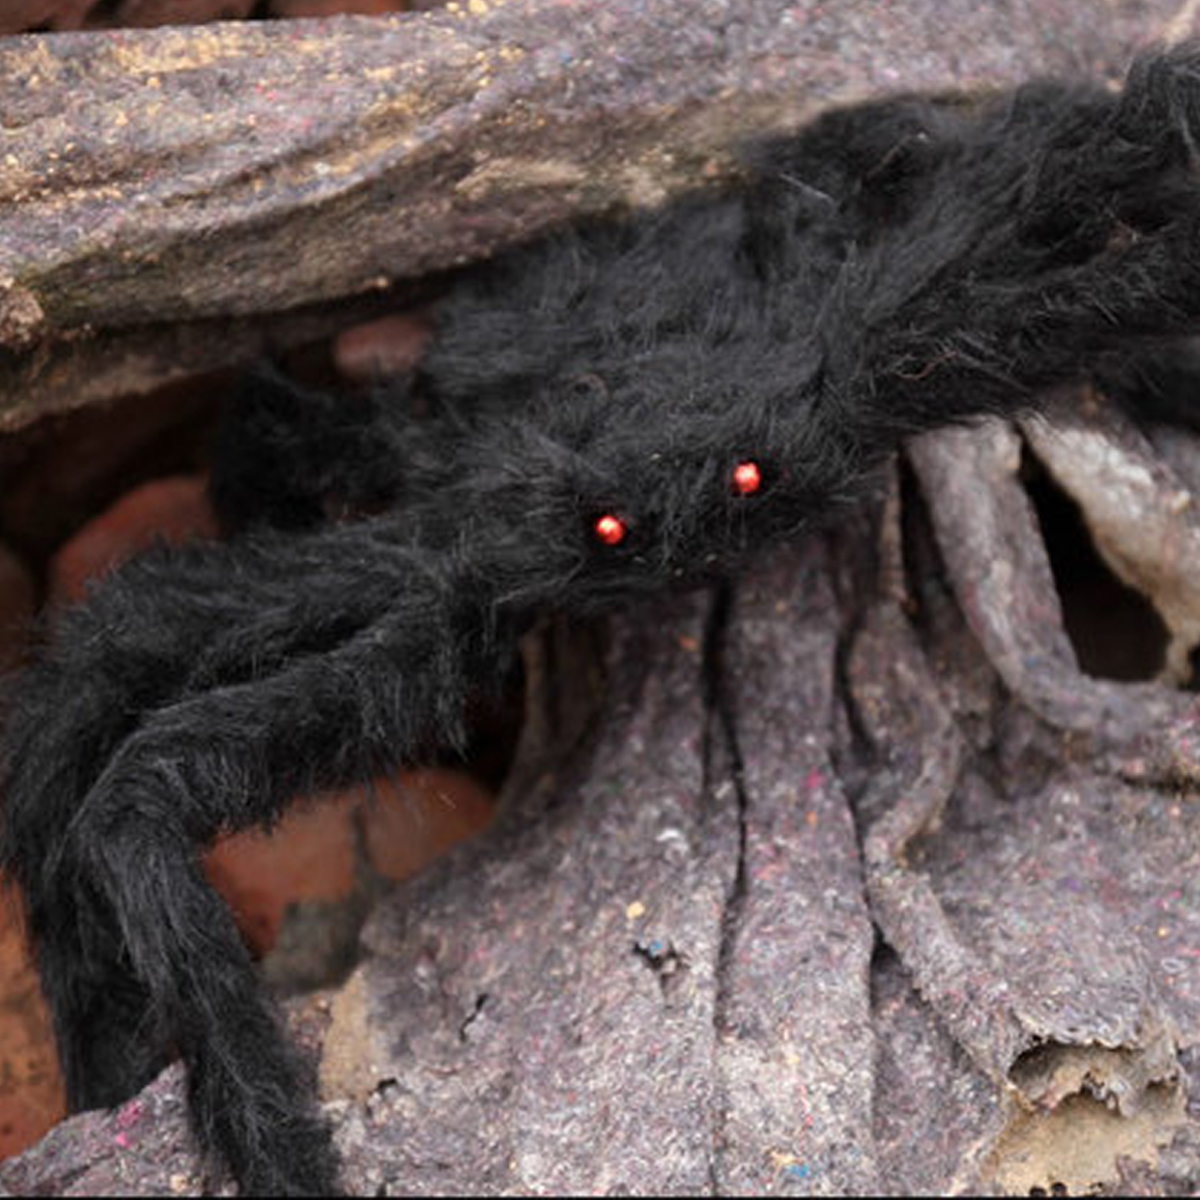 5FT150cm-Hairy-Giant-Spider-Decorations-Huge-Halloween-Outdoor-Decor-Toys-for-Party-1210153